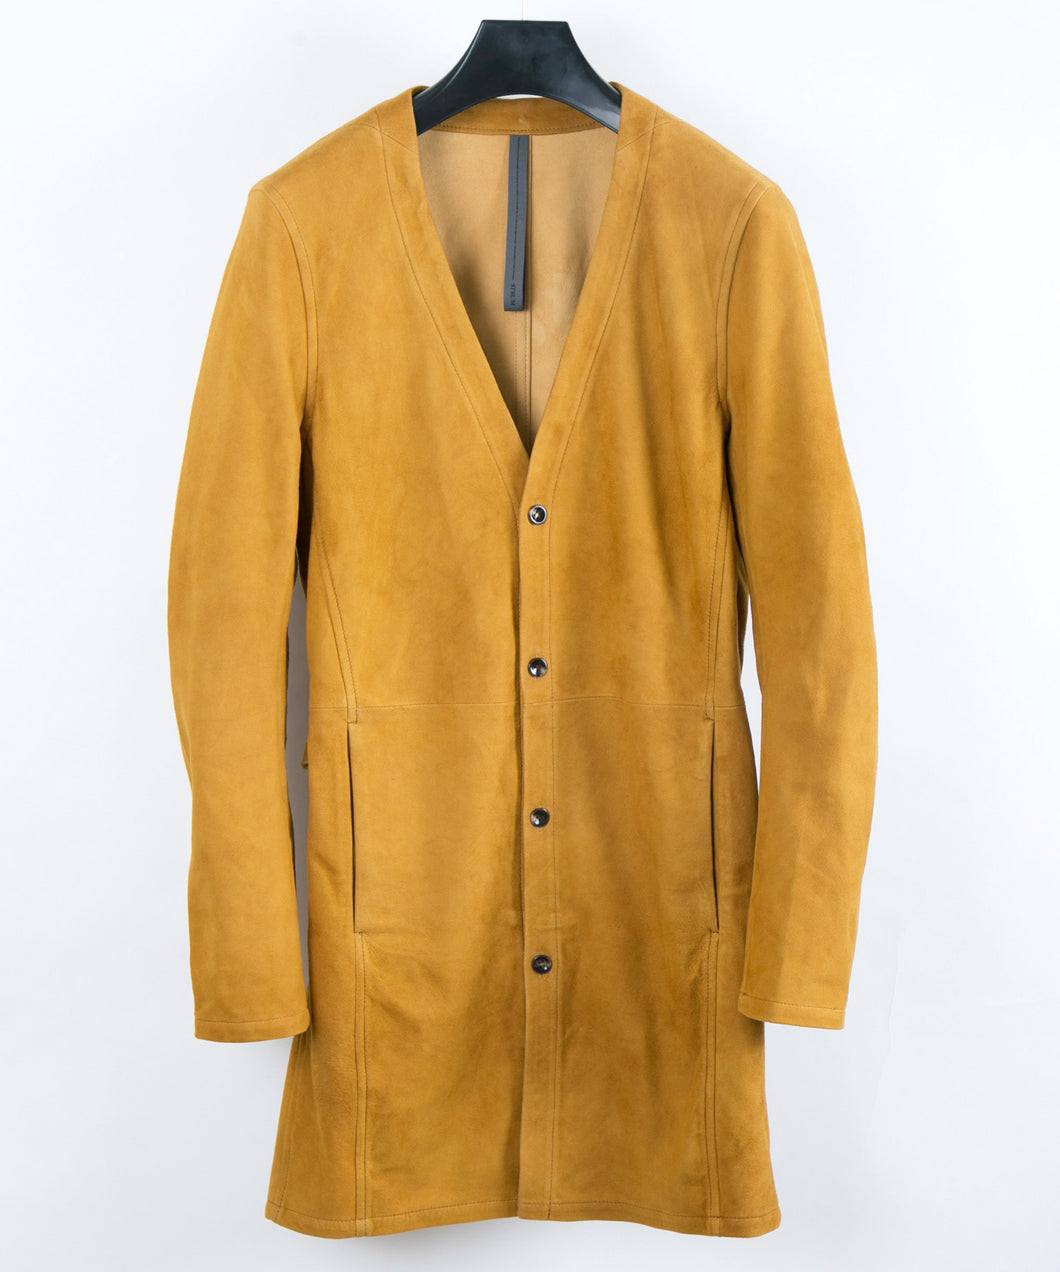 Highland Lamb Silky Suede Leather Coat / Camel